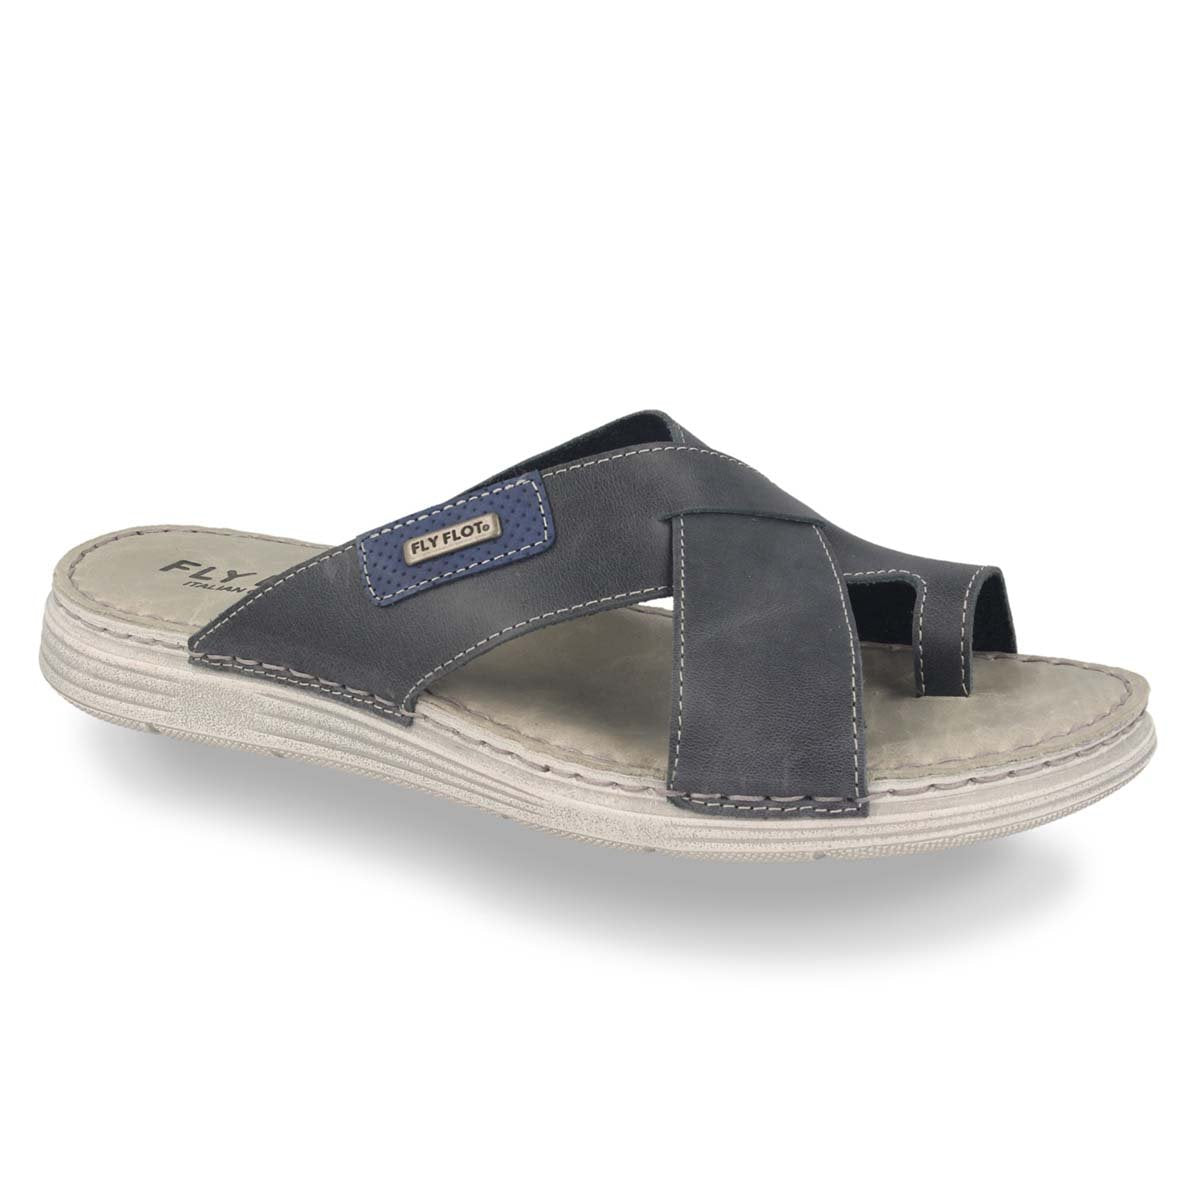 See the Trendy Leather Slide Men Sandals in the colour BLACK, available in various sizes